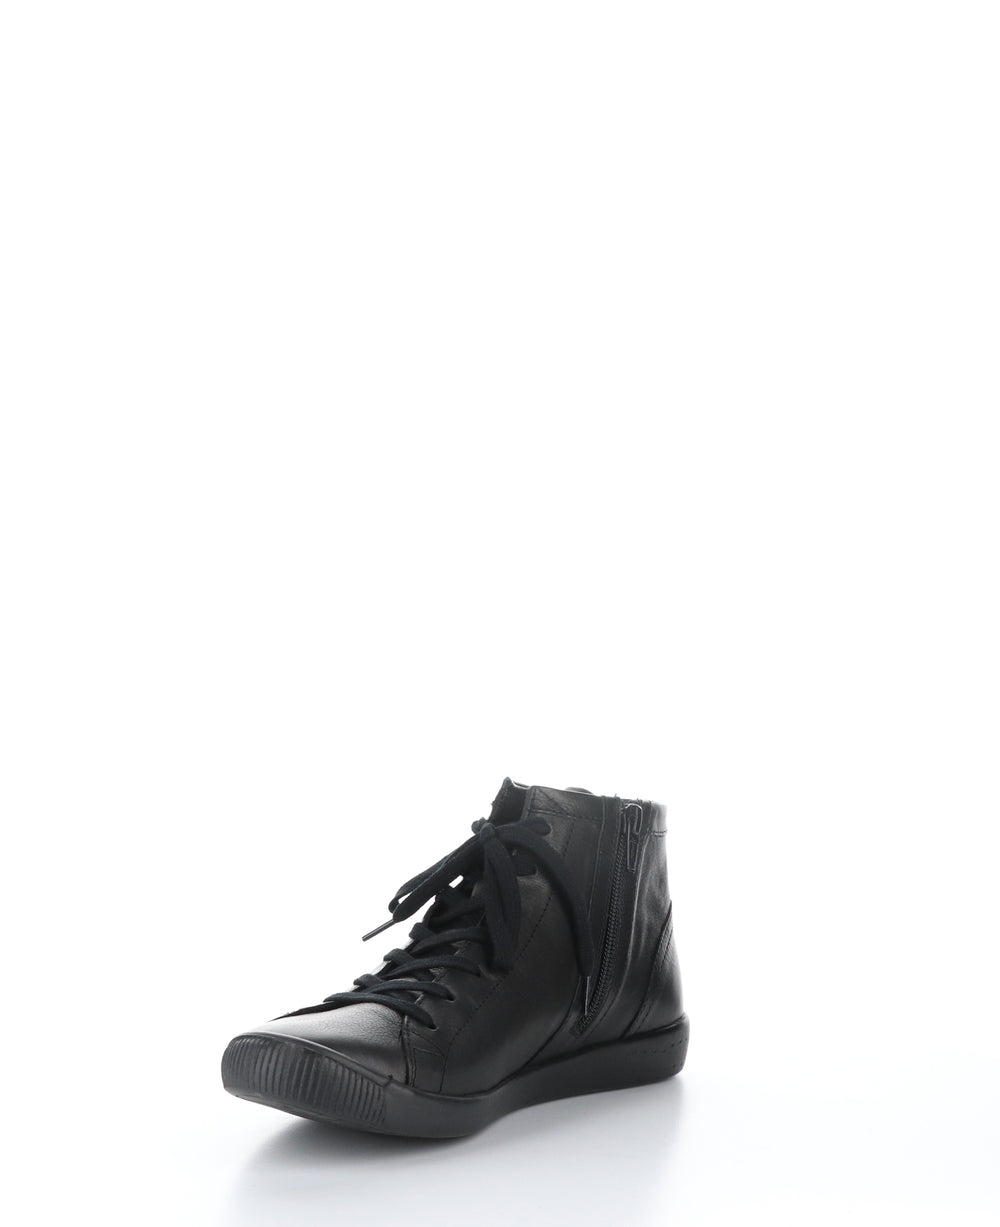 IBBI653SOF Black Round Toe Shoes|IBBI653SOF Chaussures à Bout Rond in Noir